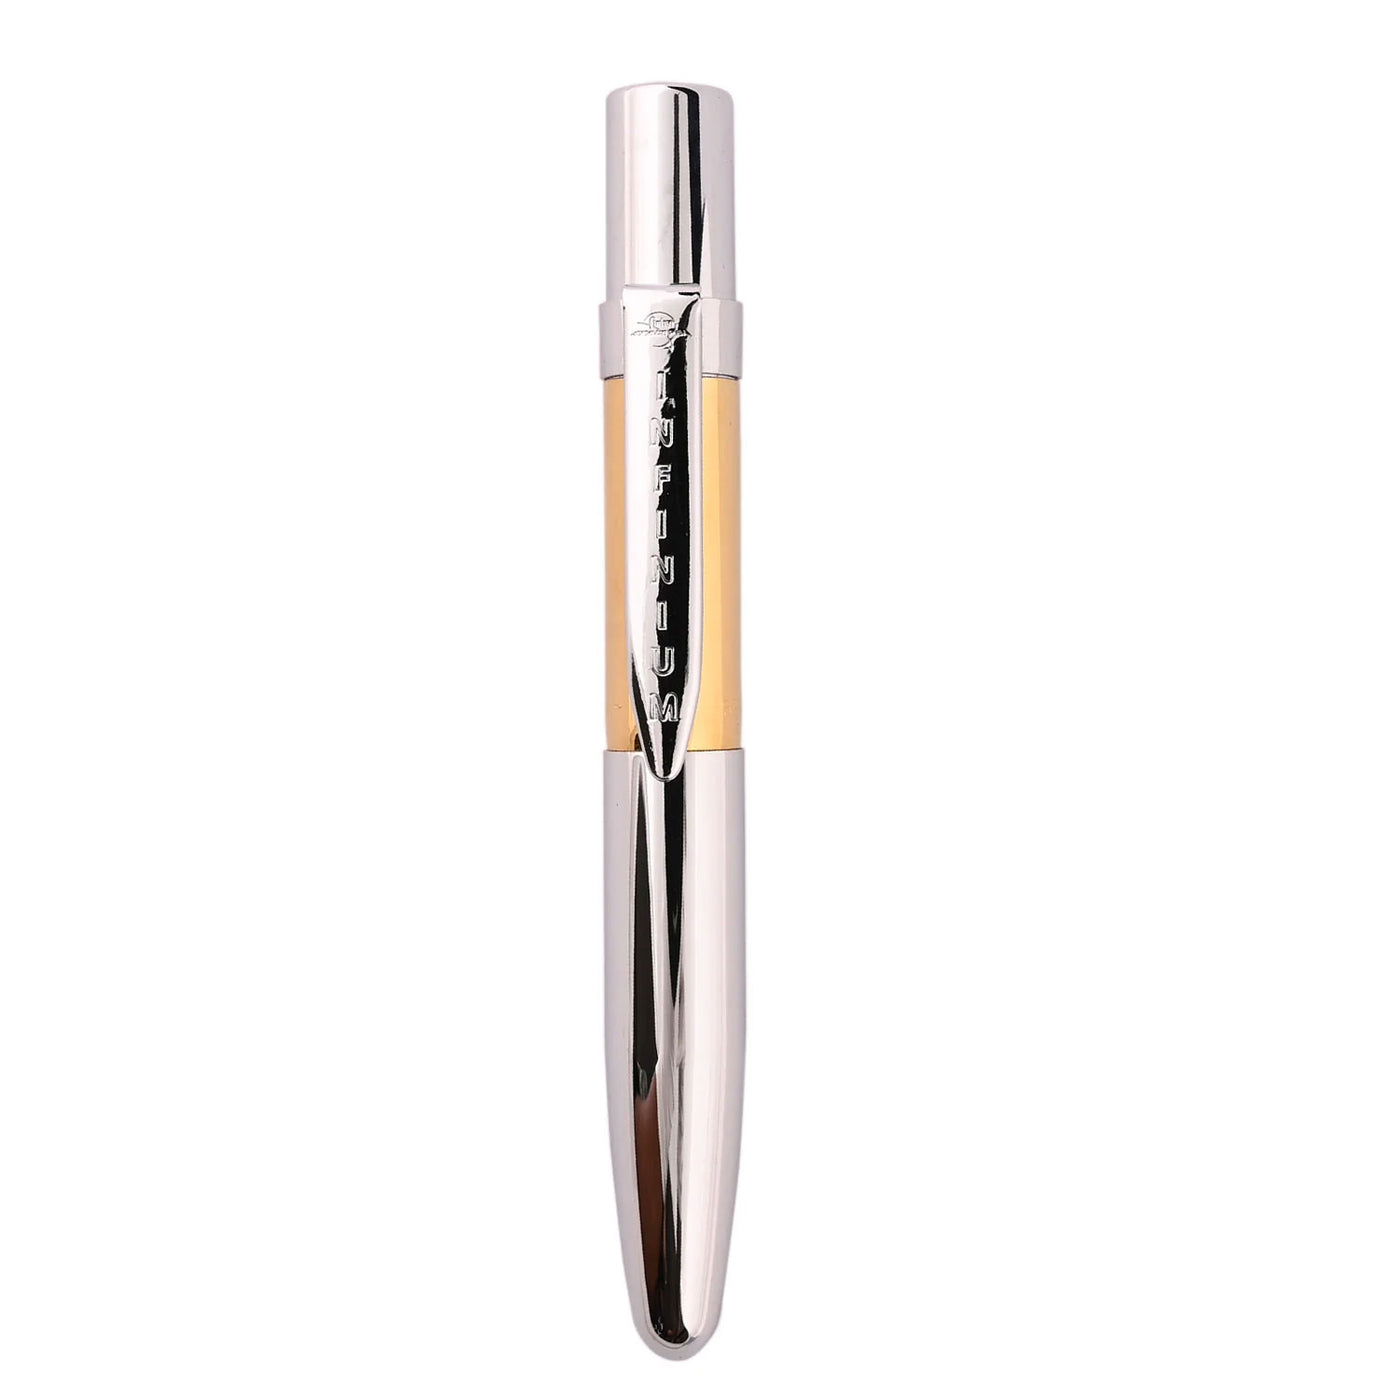 Fisher Space Infinium Ball Pen with Black Ink - Gold Titanium & Chrome 5